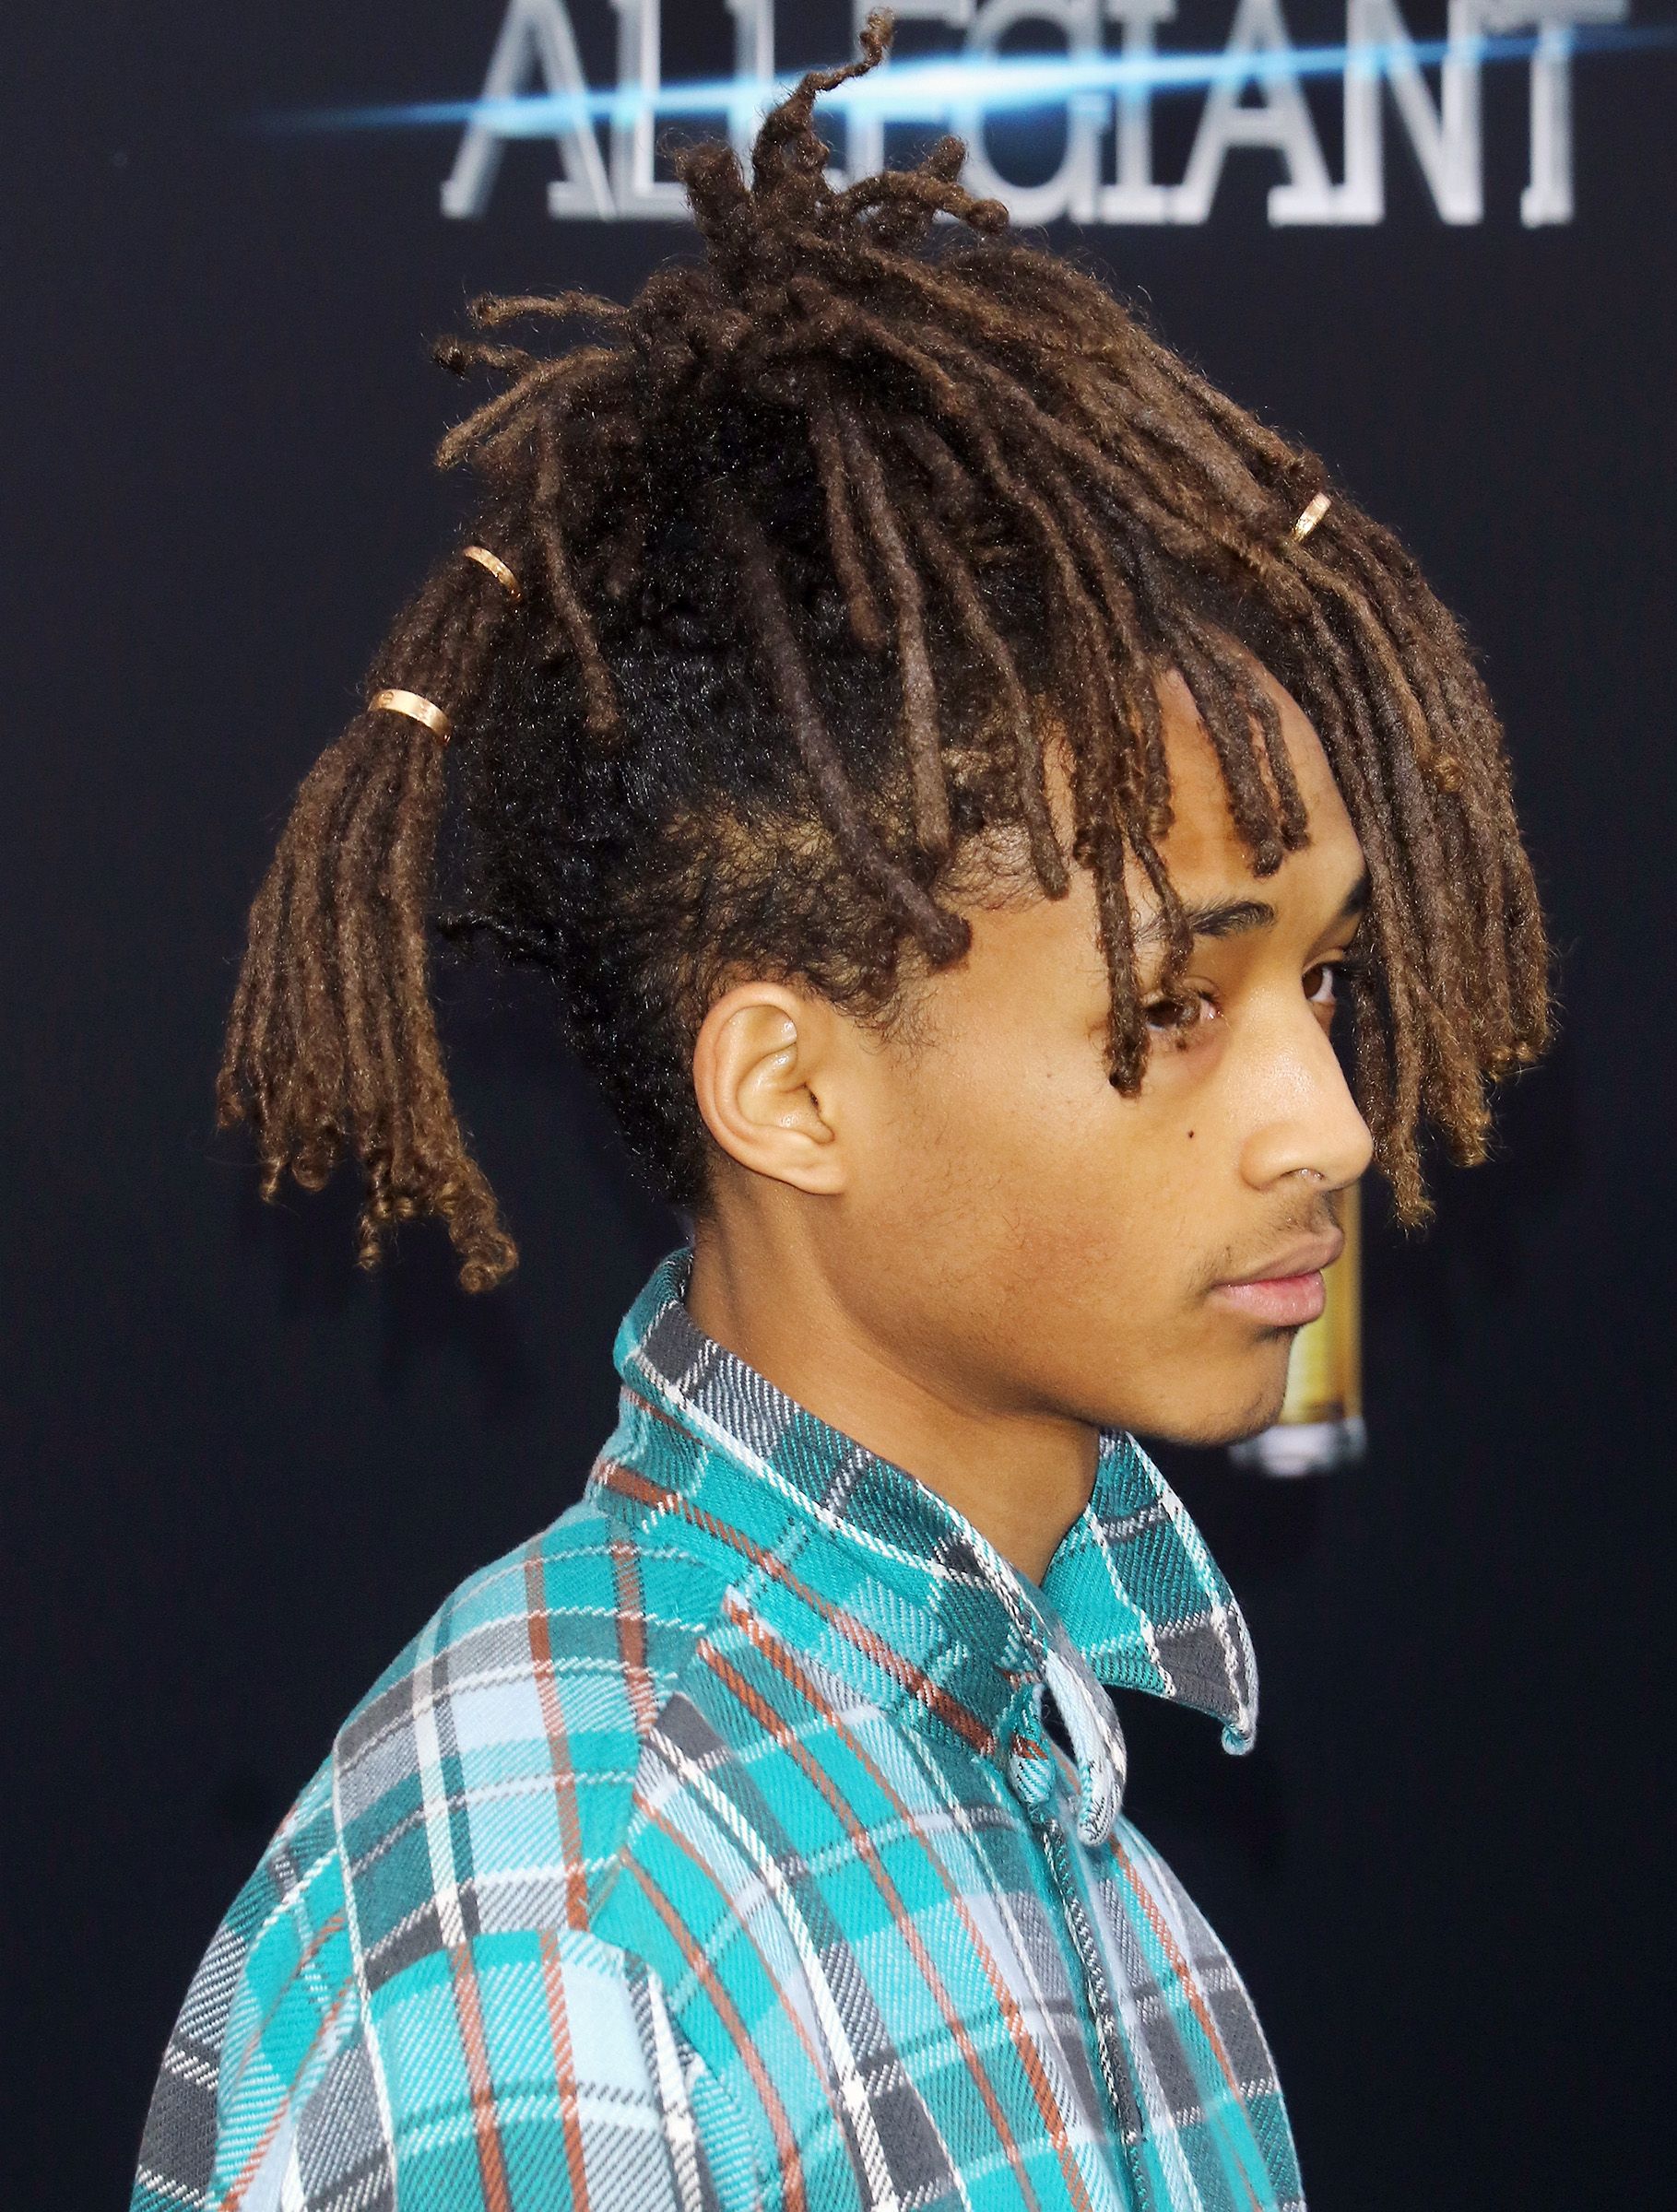 This Is What Inspires Jaden Smith About Fashion the Most